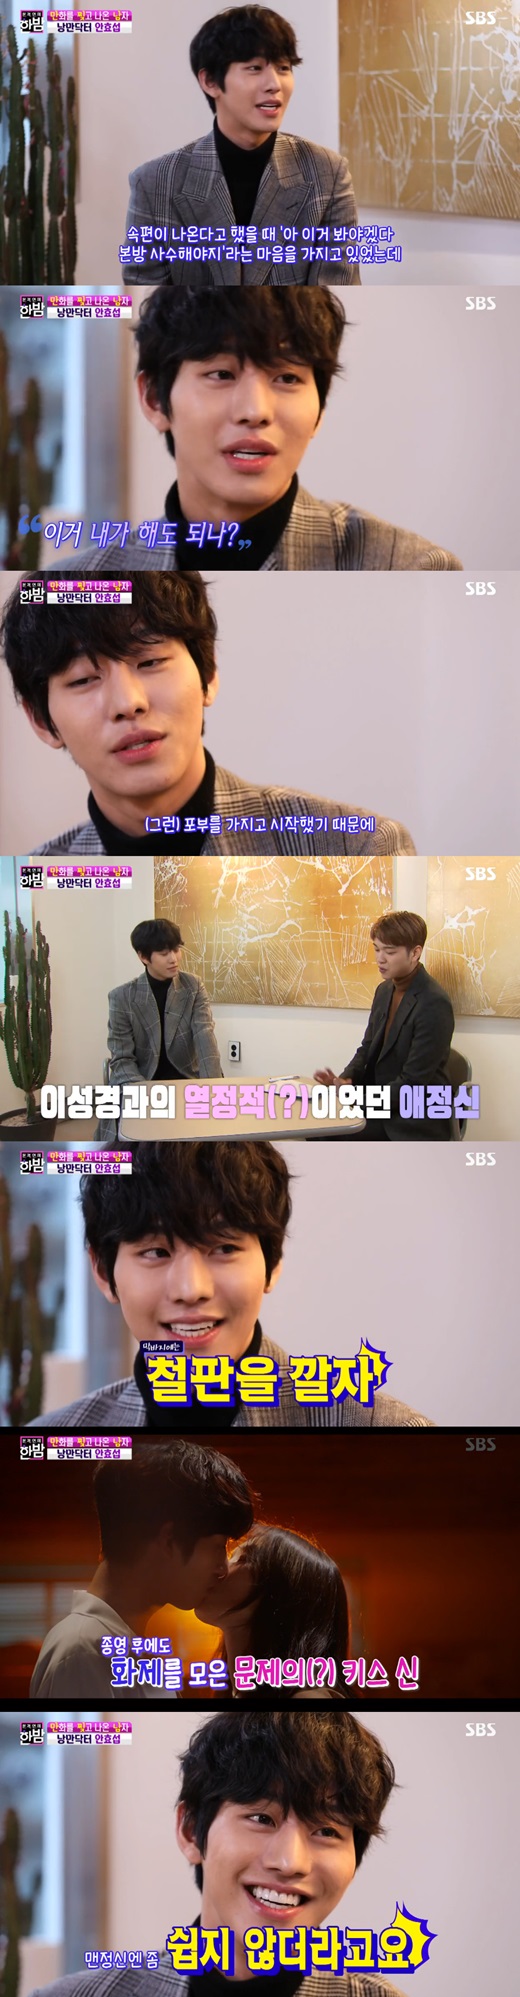 Actor Ahn Hyo-seop has revealed the kissing god behind Lee Sung-kyung.On the 4th, SBS Full Entertainment Midnight interviewed Ahn Hyo-seop.Ahn Hyo-seop said, I really enjoyed Season 1 and I wanted to do it when I came to the proposal.I did it with the heart that it would help the drama. It was very difficult in the beginning and there was a lot of NG, said Ahn Hyo-seop, referring to the kissing scene, it was hard in the spirit of manship.I ate wine and filmed it, he said later.Theres still a lot I want to do, I think all genres will be fun, he said of the role he wanted to challenge.